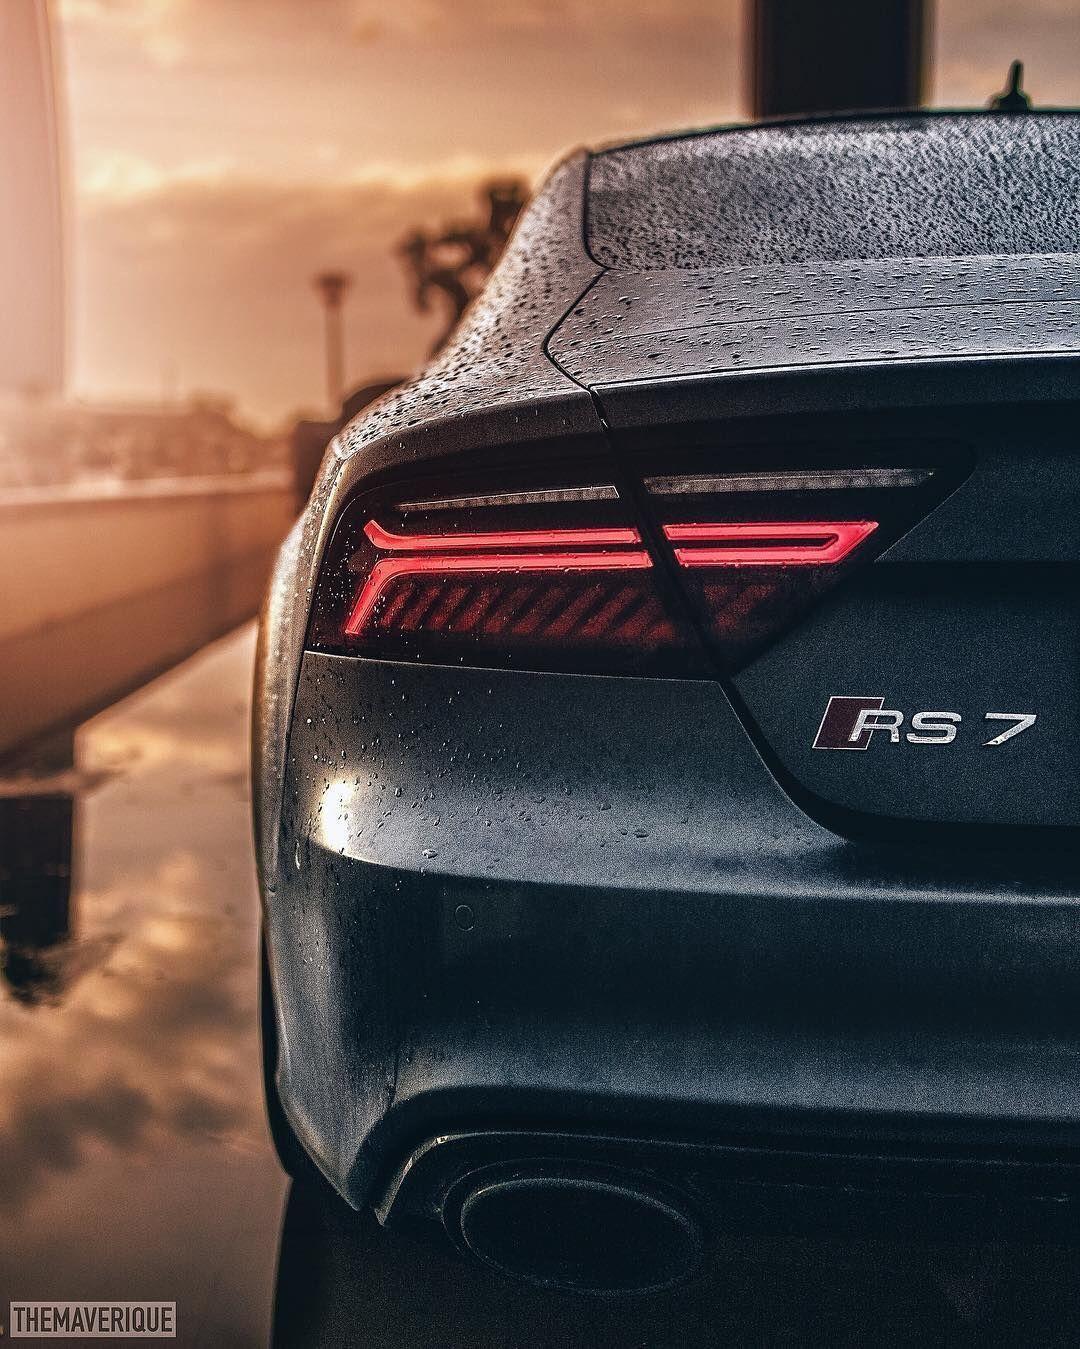 Audi RS7 phone wallpaper I made. : r/ForzaWallpapers